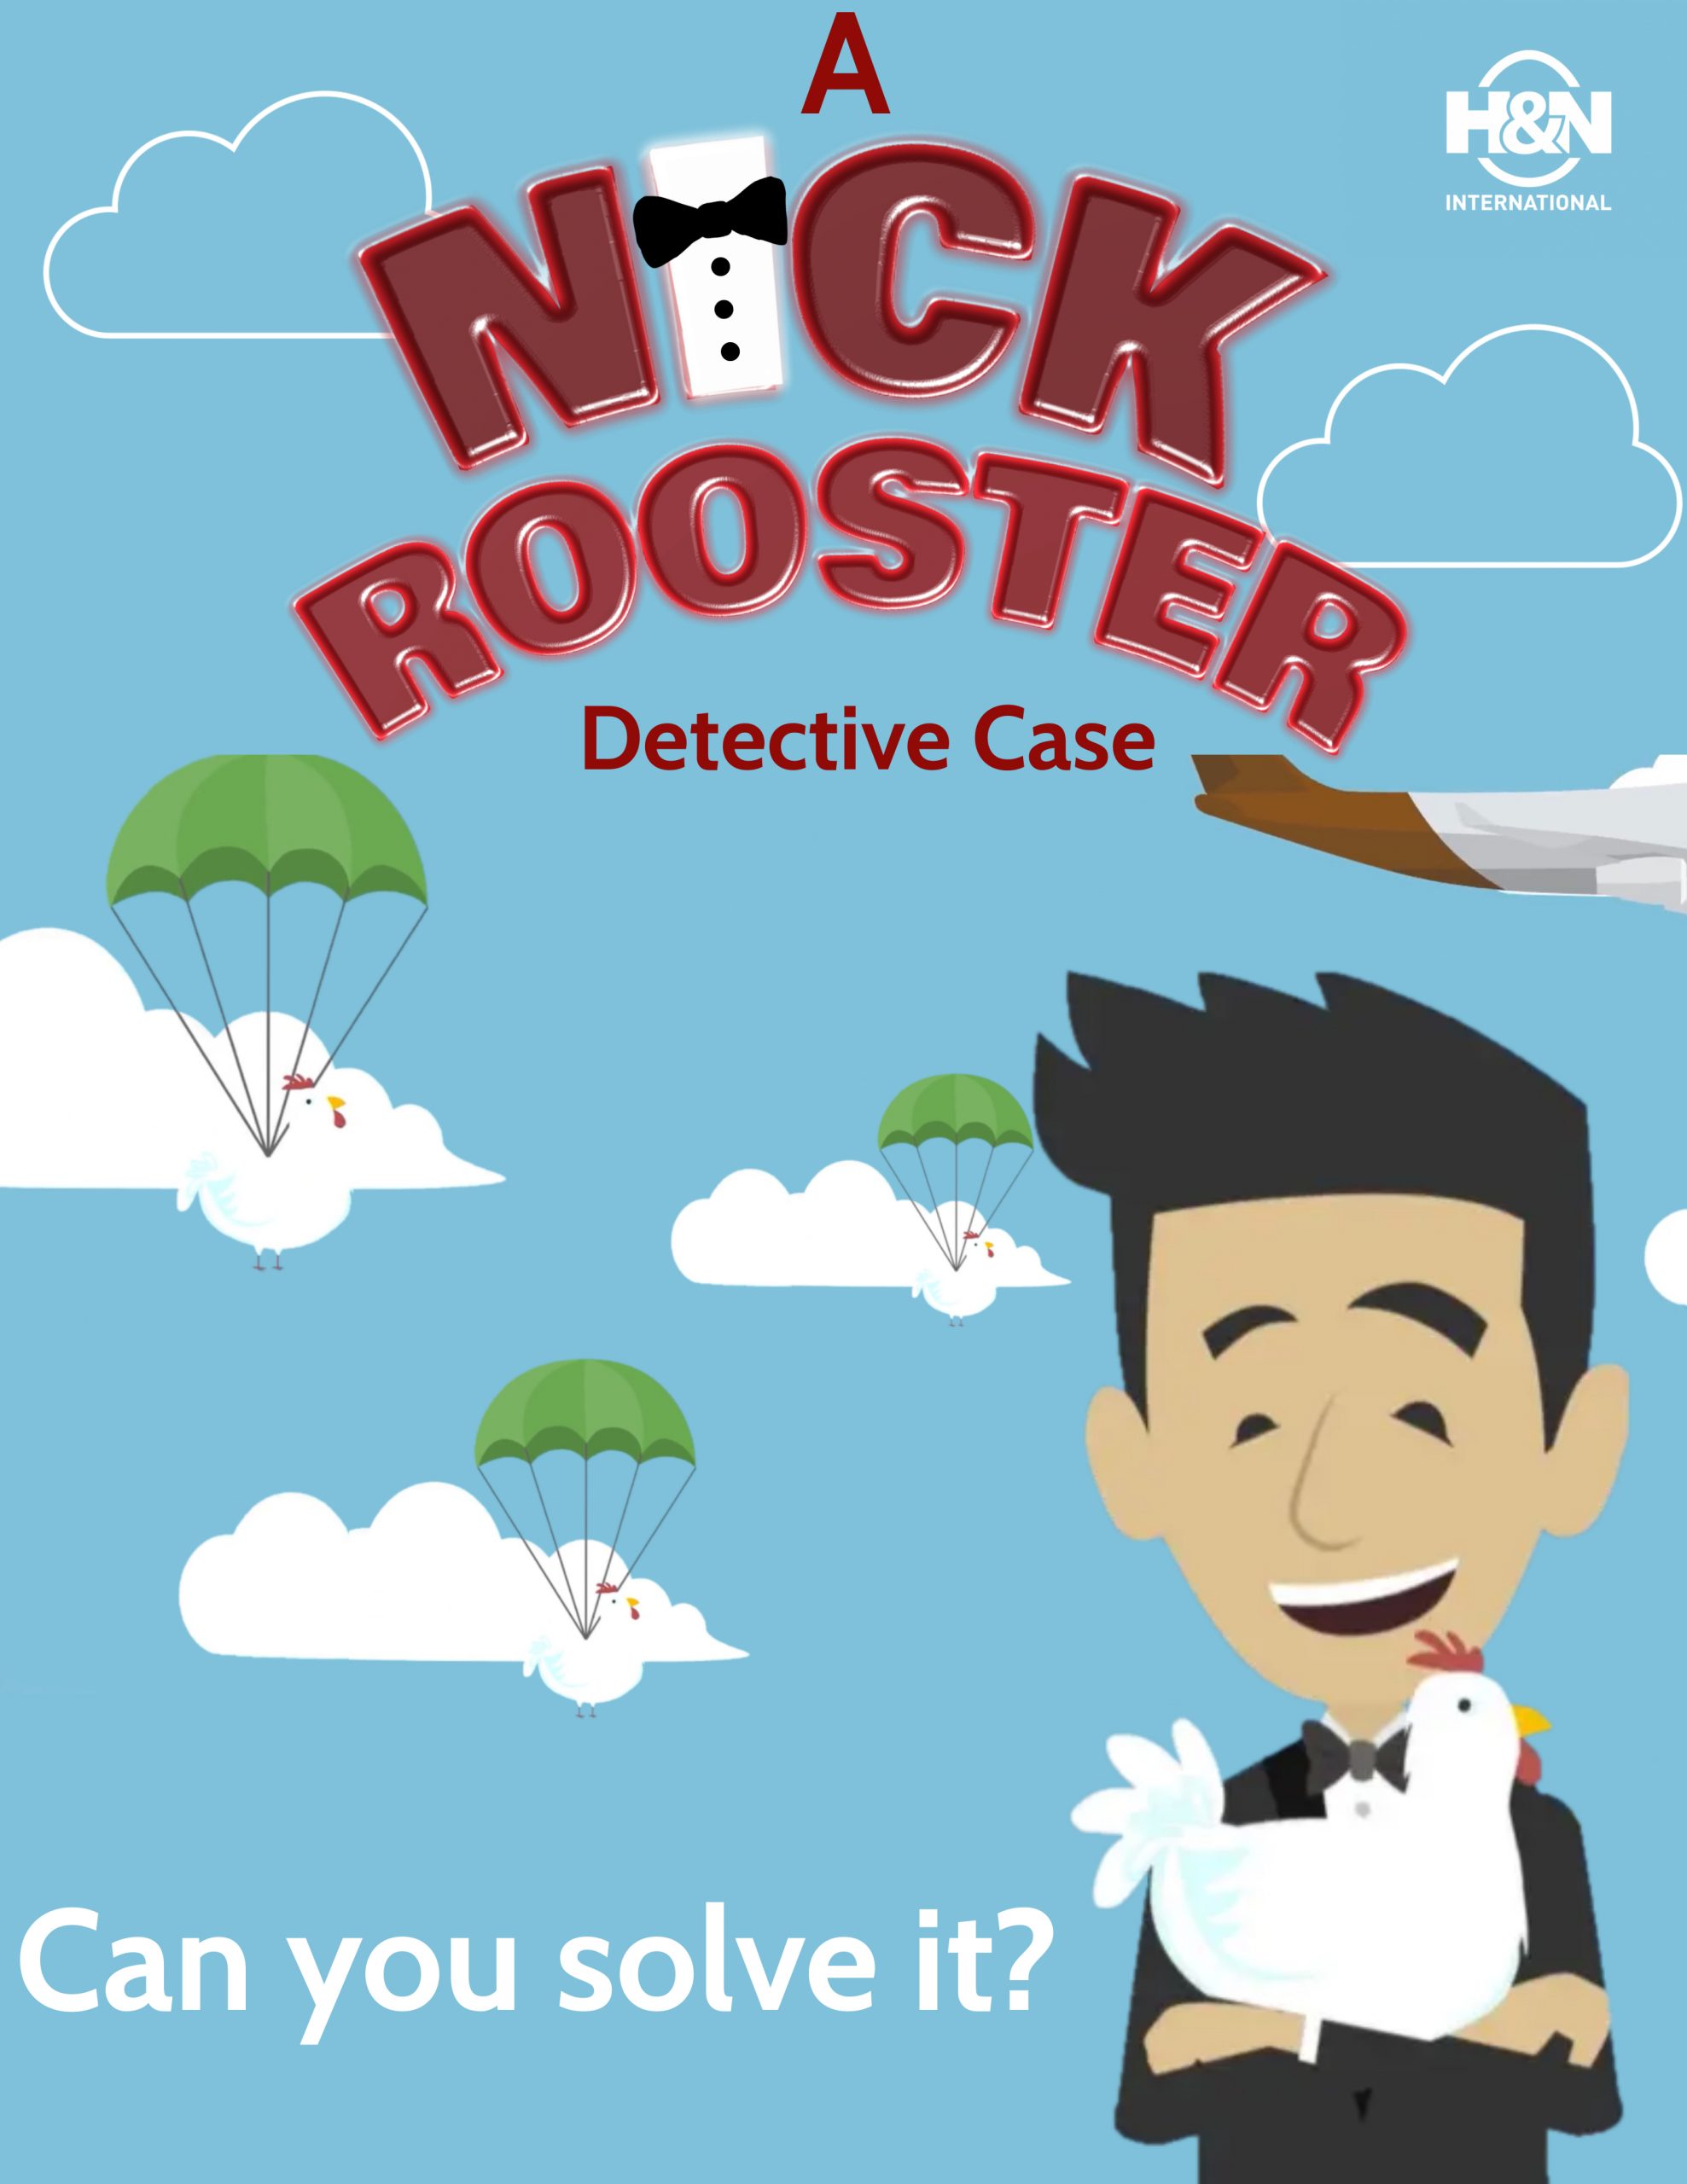 Nick Rooster case no. 2